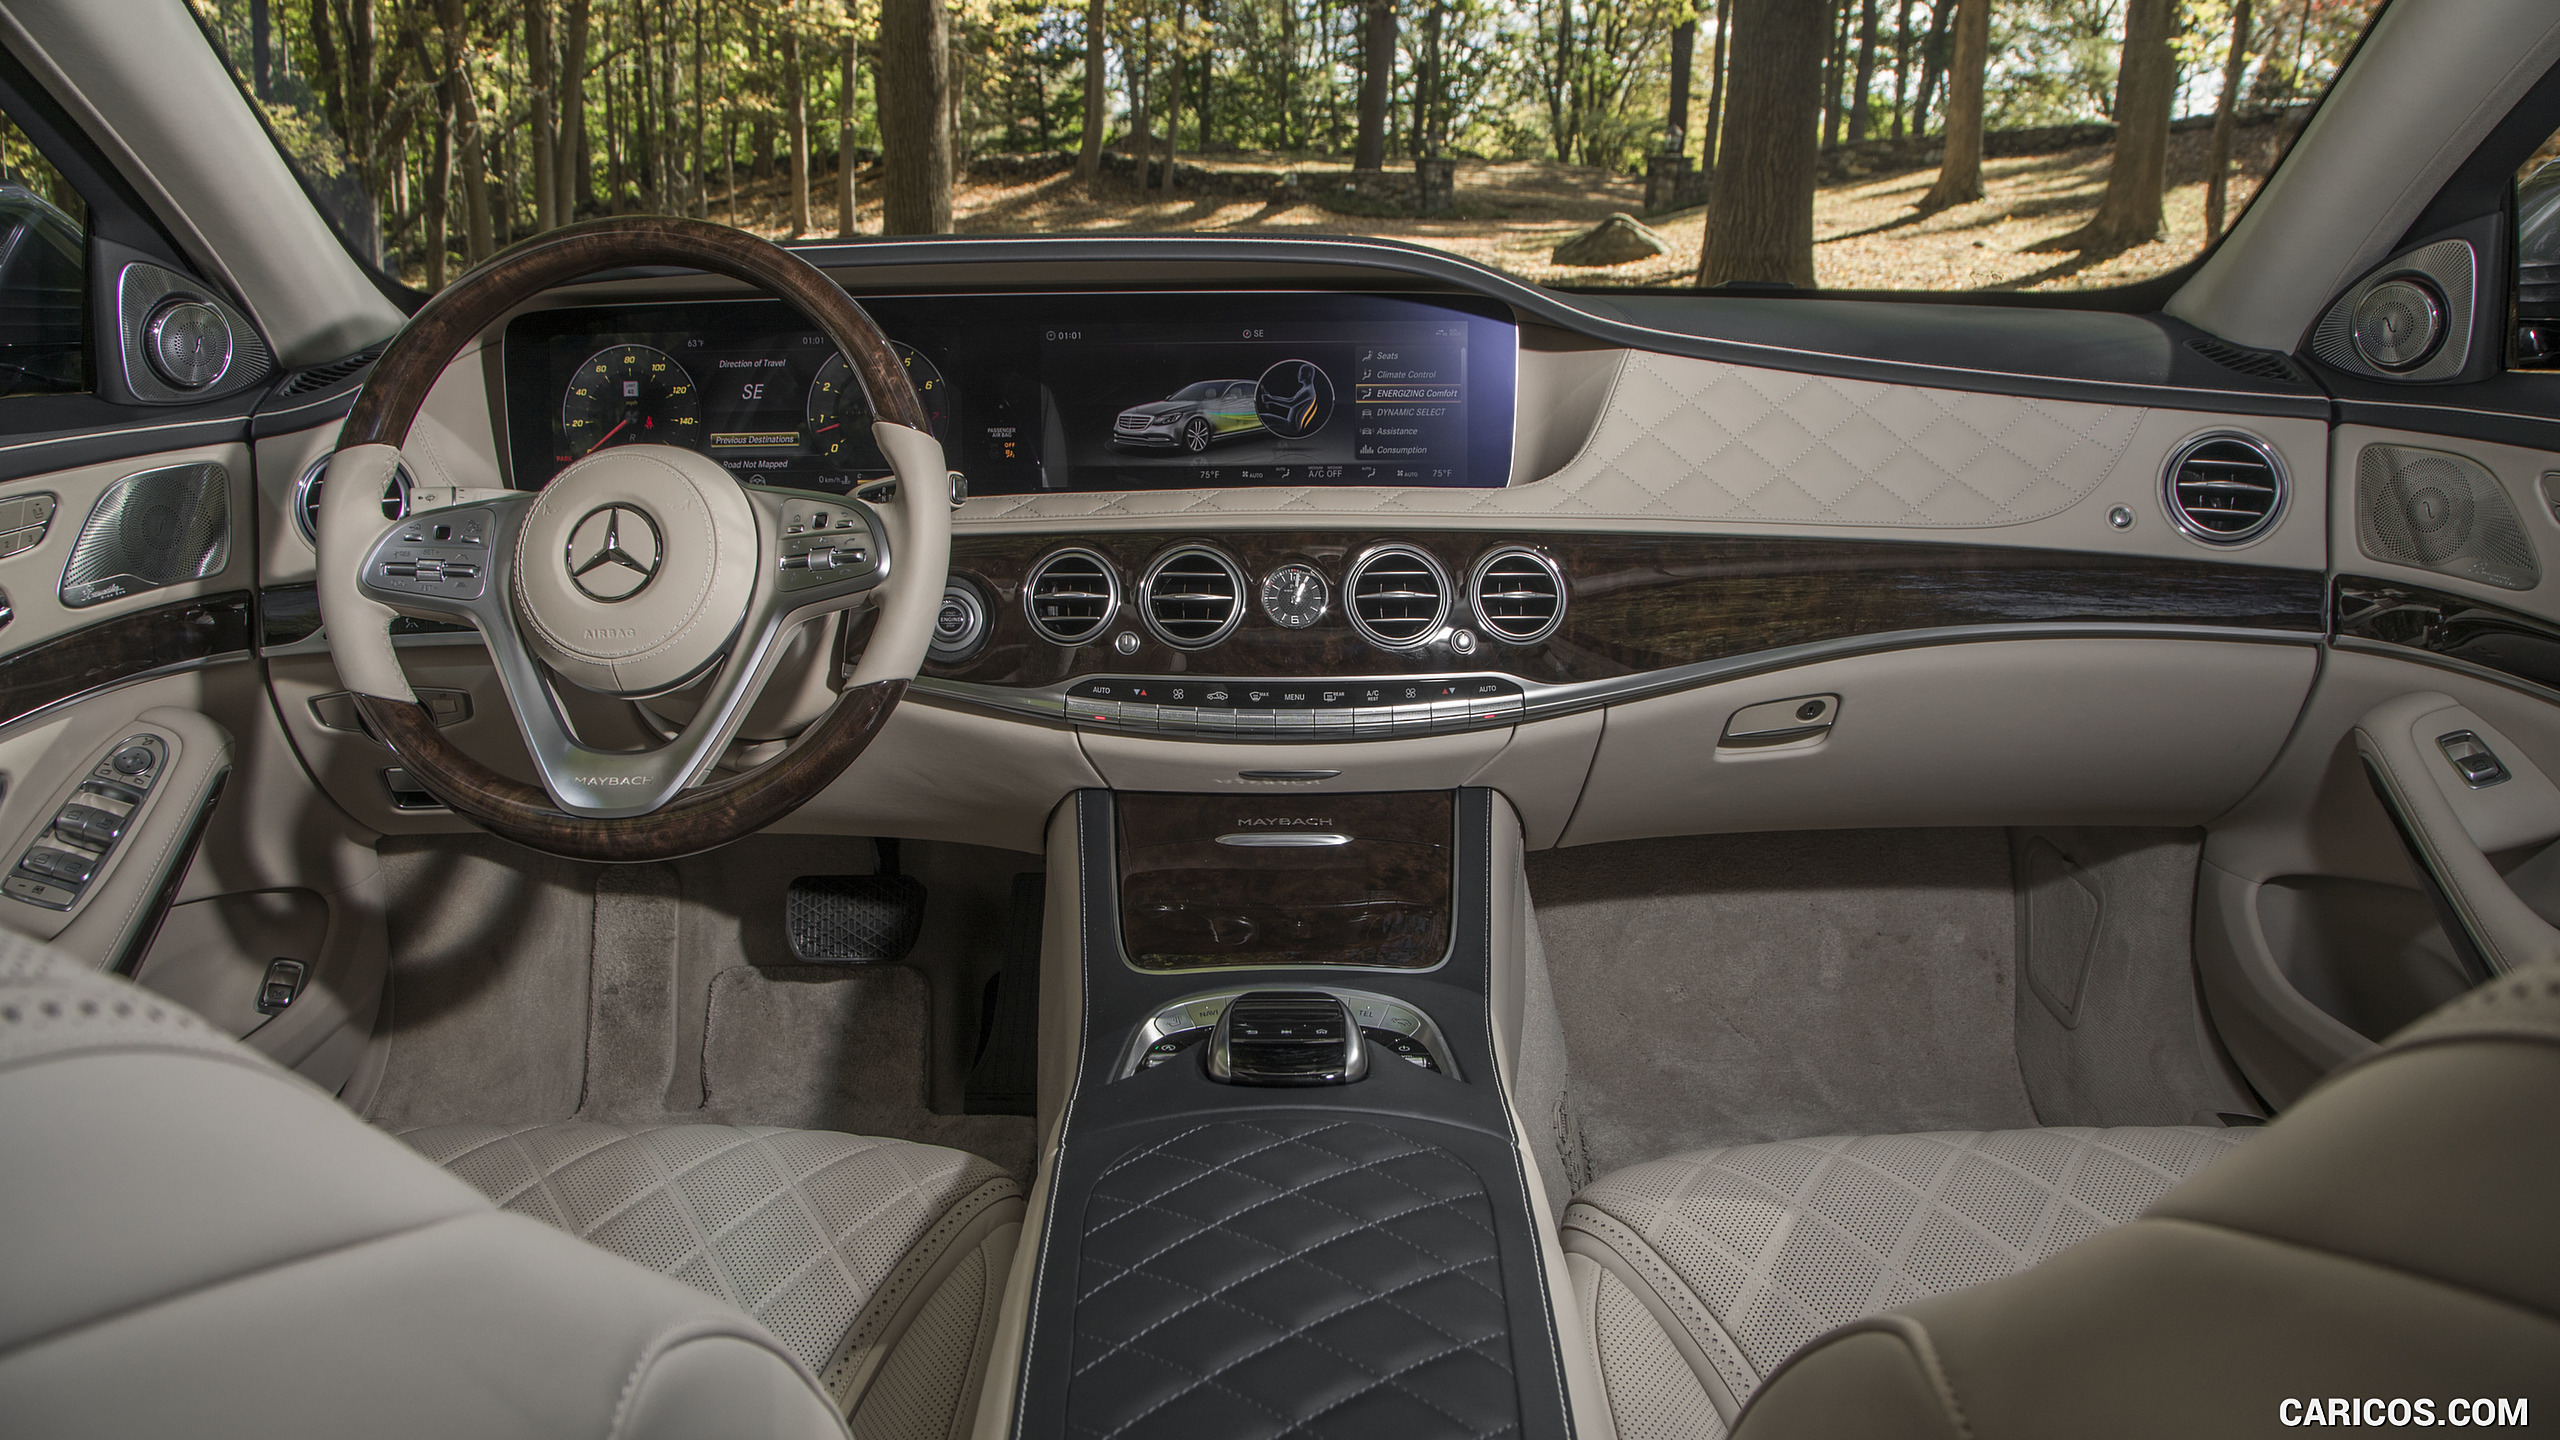 2018 Mercedes-Maybach S-Class S560 4MATIC - Interior, Cockpit, #50 of 63